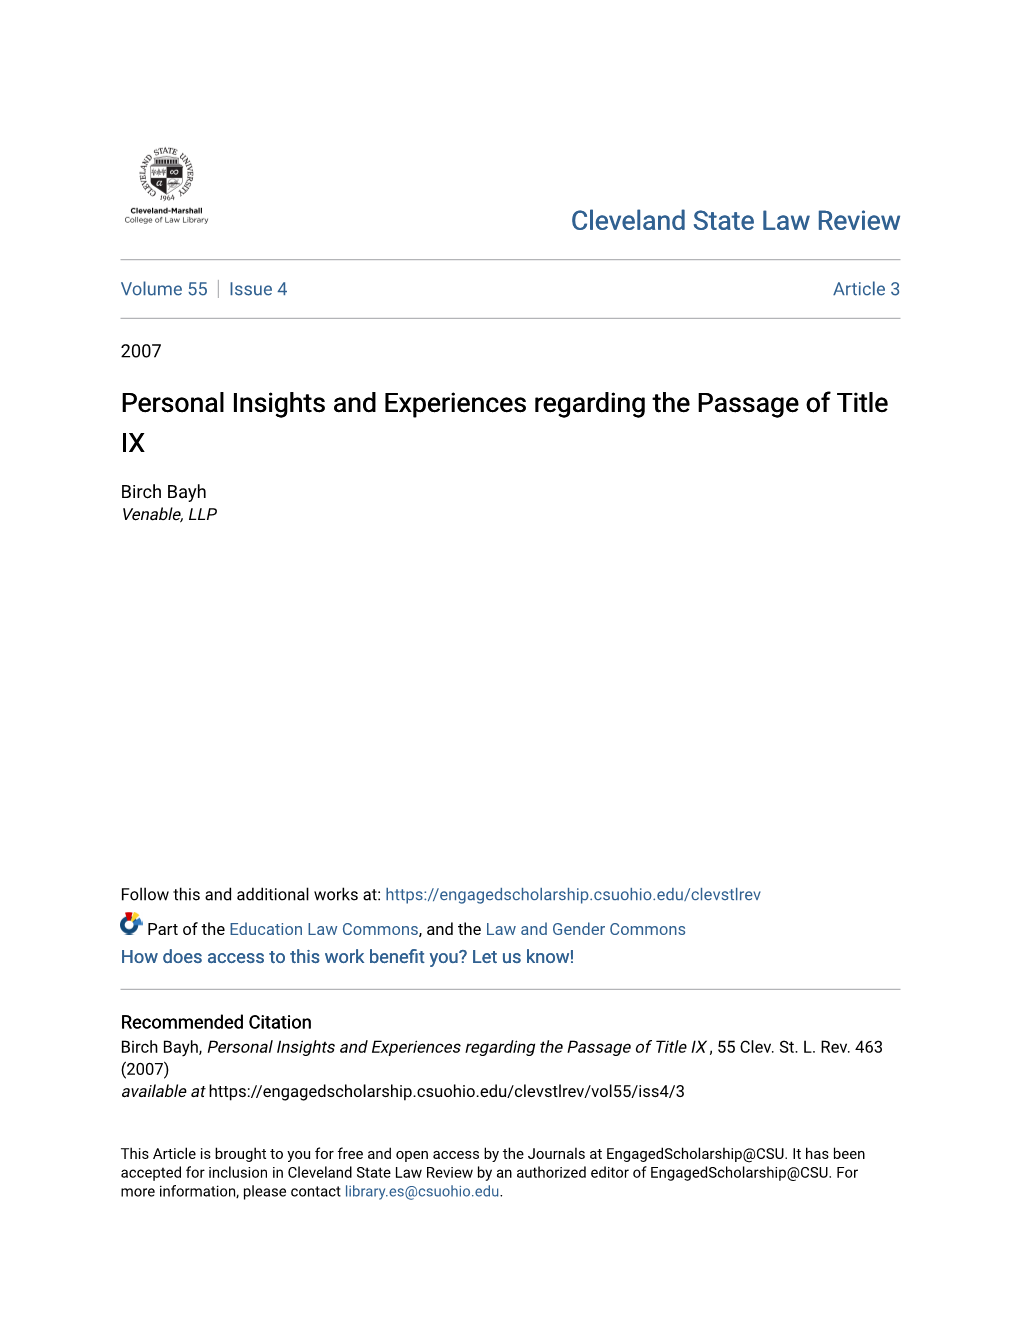 Personal Insights and Experiences Regarding the Passage of Title IX